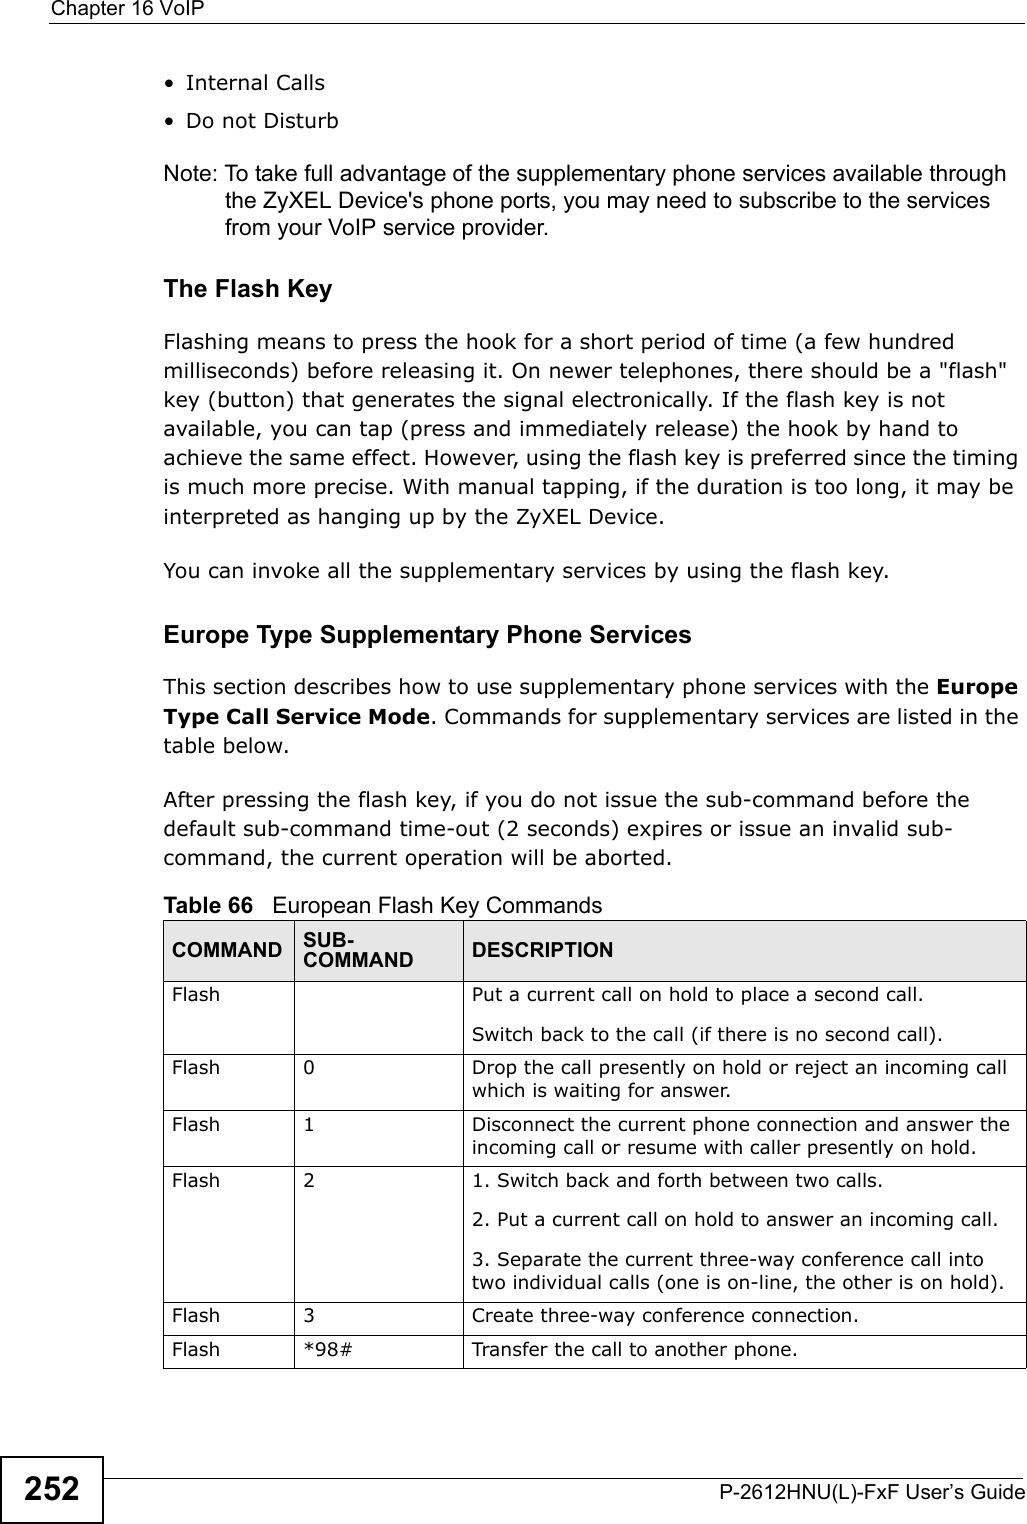 Chapter 16 VoIPP-2612HNU(L)-FxF User’s Guide252• Internal Calls• Do not DisturbNote: To take full advantage of the supplementary phone services available throughthe ZyXEL Device&apos;s phone ports, you may need to subscribe to the services from your VoIP service provider.The Flash KeyFlashing means to press the hook for a short period of time (a few hundred milliseconds) before releasing it. On newer telephones, there should be a &quot;flash&quot; key (button) that generates the signal electronically. If the flash key is notavailable, you can tap (press and immediately release) the hook by hand to achieve the same effect. However, using the flash key is preferred since the timing is much more precise. With manual tapping, if the duration is too long, it may be interpreted as hanging up by the ZyXEL Device.You can invoke all the supplementary services by using the flash key.Europe Type Supplementary Phone ServicesThis section describes how to use supplementary phone services with the Europe Type Call Service Mode. Commands for supplementary services are listed in the table below.After pressing the flash key, if you do not issue the sub-command before the default sub-command time-out (2 seconds) expires or issue an invalid sub-command, the current operation will be aborted.Table 66   European Flash Key CommandsCOMMAND SUB-COMMAND DESCRIPTIONFlash  Put a current call on hold to place a second call.Switch back to the call (if there is no second call).Flash 0 Drop the call presently on hold or reject an incoming call which is waiting for answer.Flash 1 Disconnect the current phone connection and answer the incoming call or resume with caller presently on hold.Flash 2 1. Switch back and forth between two calls.2. Put a current call on hold to answer an incoming call.3. Separate the current three-way conference call into two individual calls (one is on-line, the other is on hold).Flash 3 Create three-way conference connection.Flash  *98# Transfer the call to another phone.